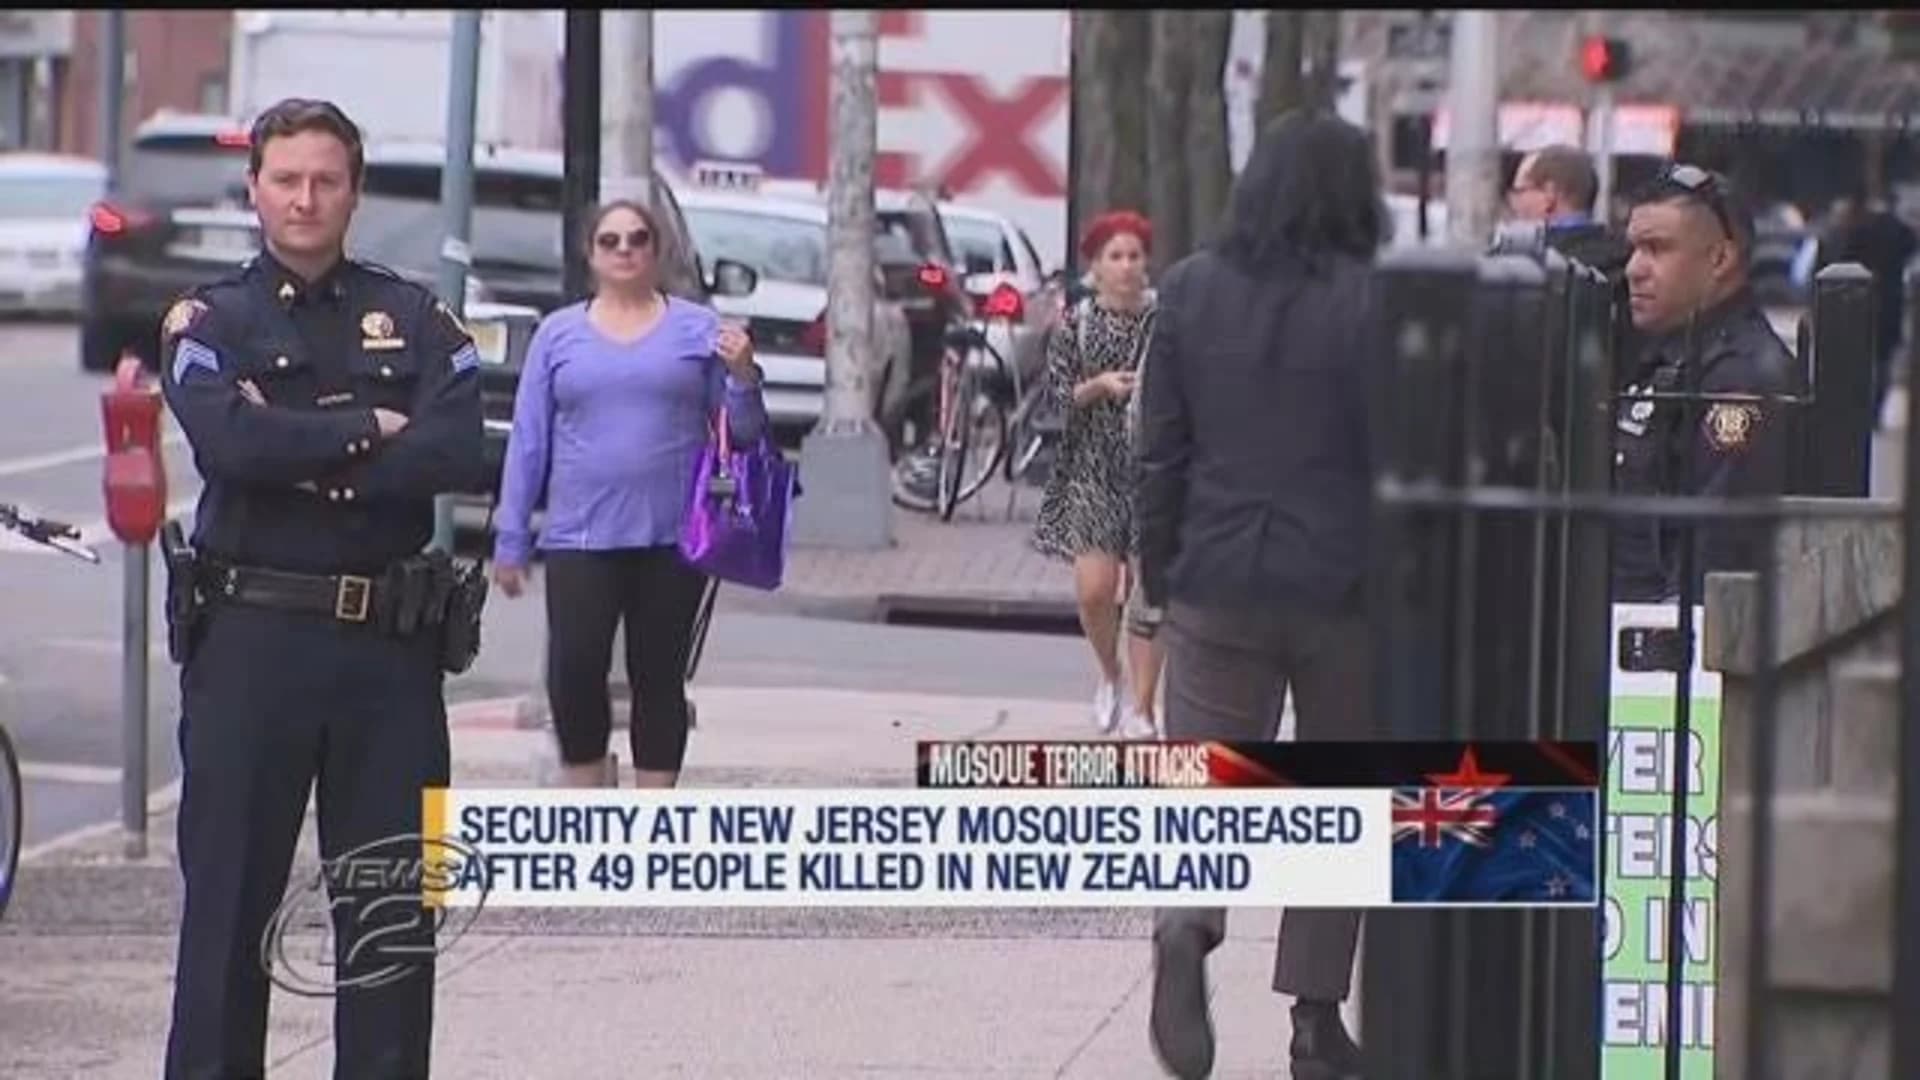 Taking precaution: Security heightened at NJ mosques following New Zealand attack